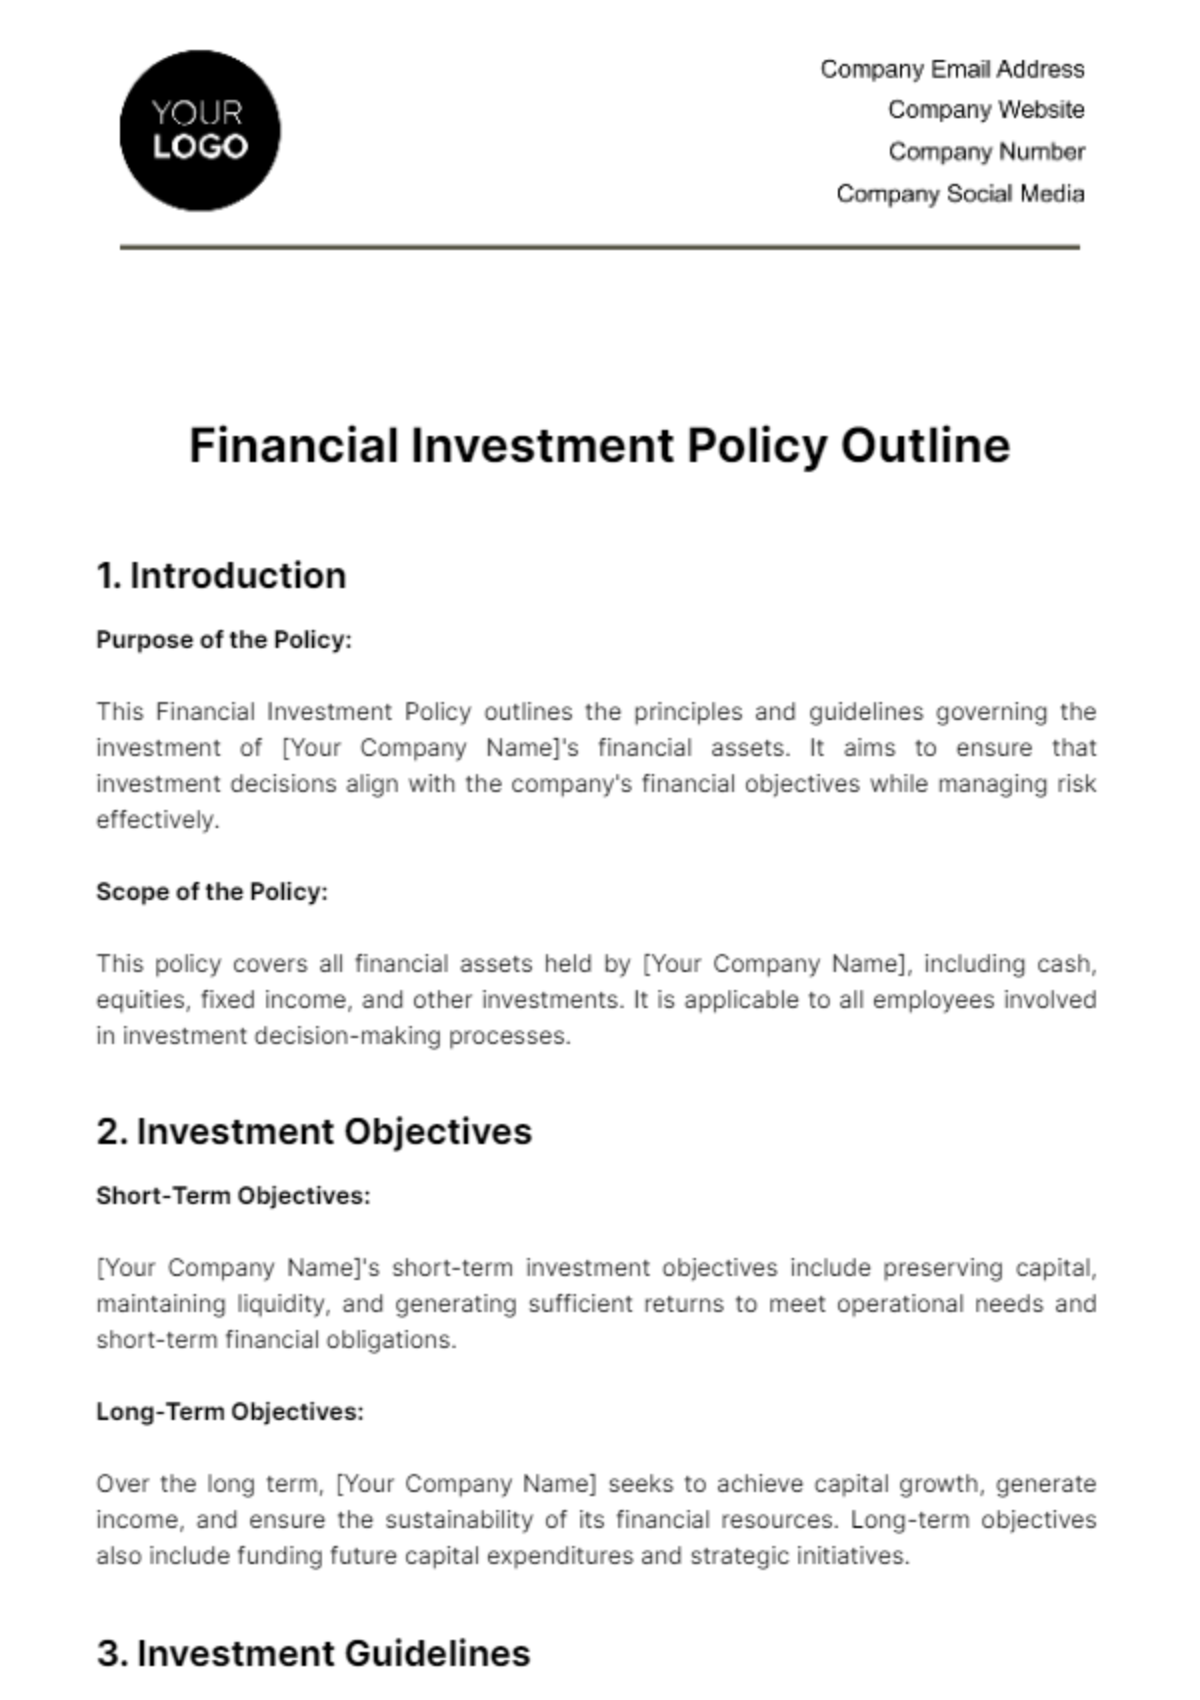 Free Financial Investment Policy Outline Template